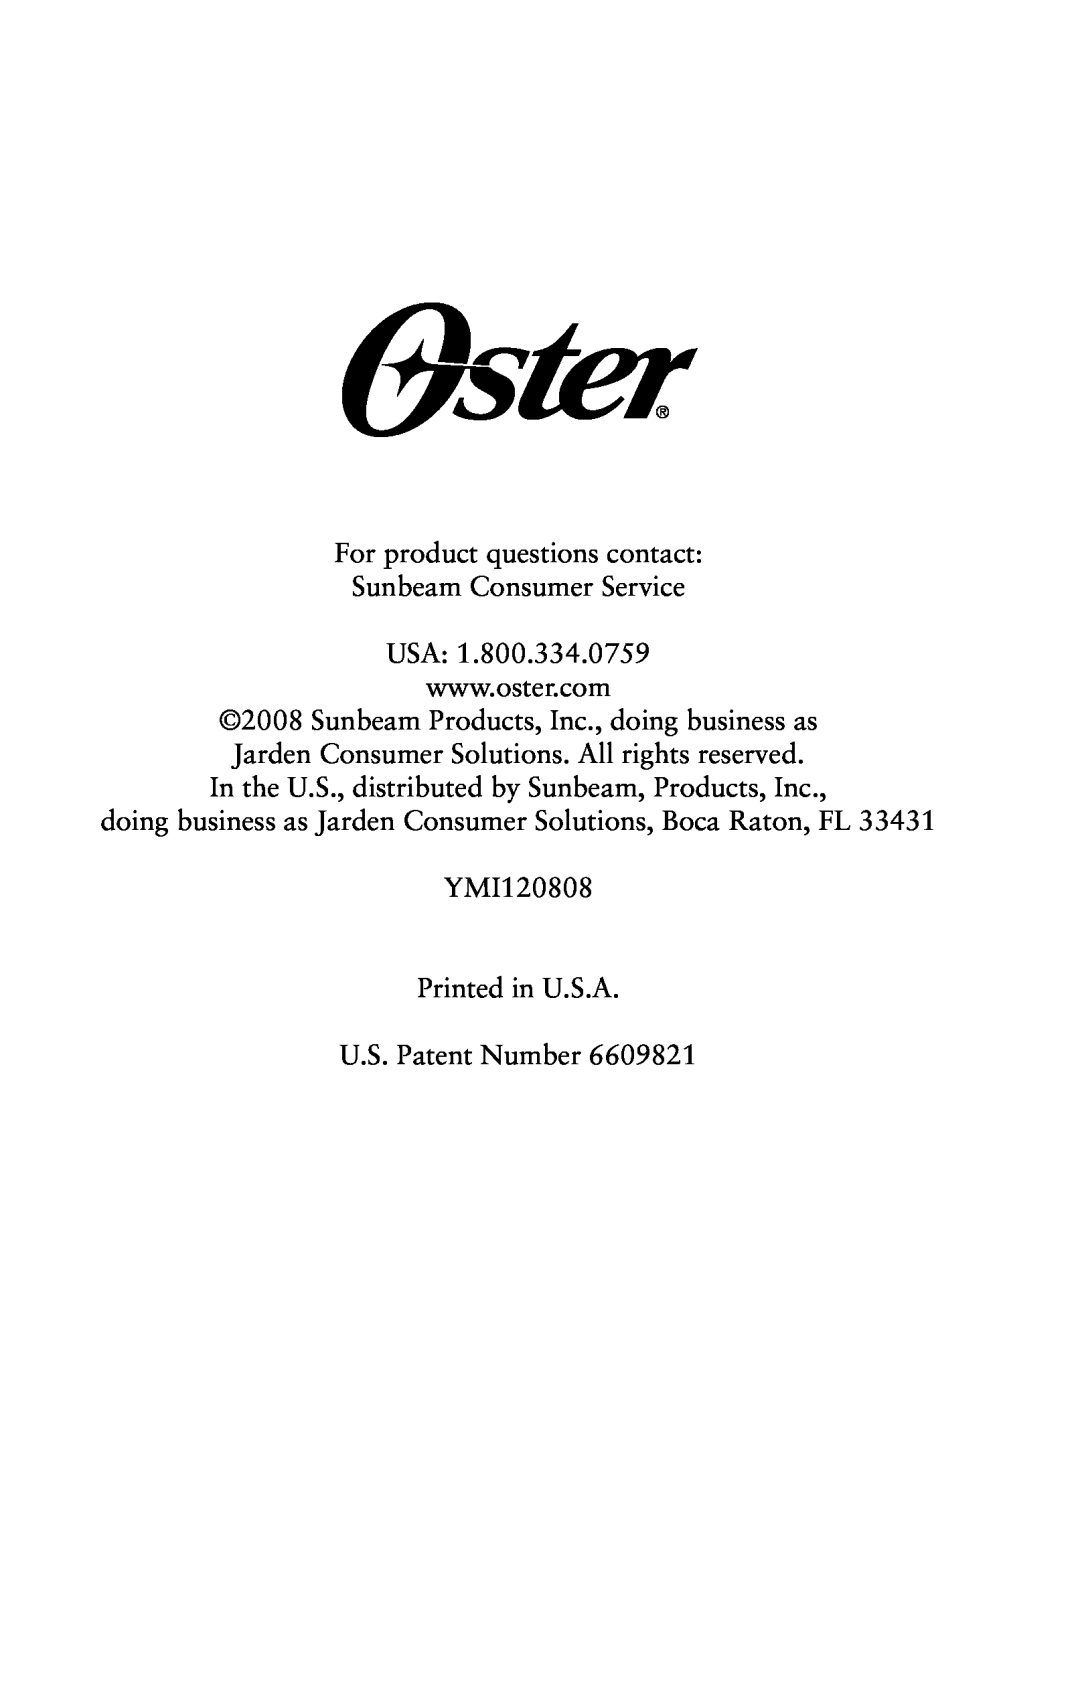 Oster 126477-001-000 For product questions contact Sunbeam Consumer Service USA, Printed in U.S.A U.S. Patent Number 